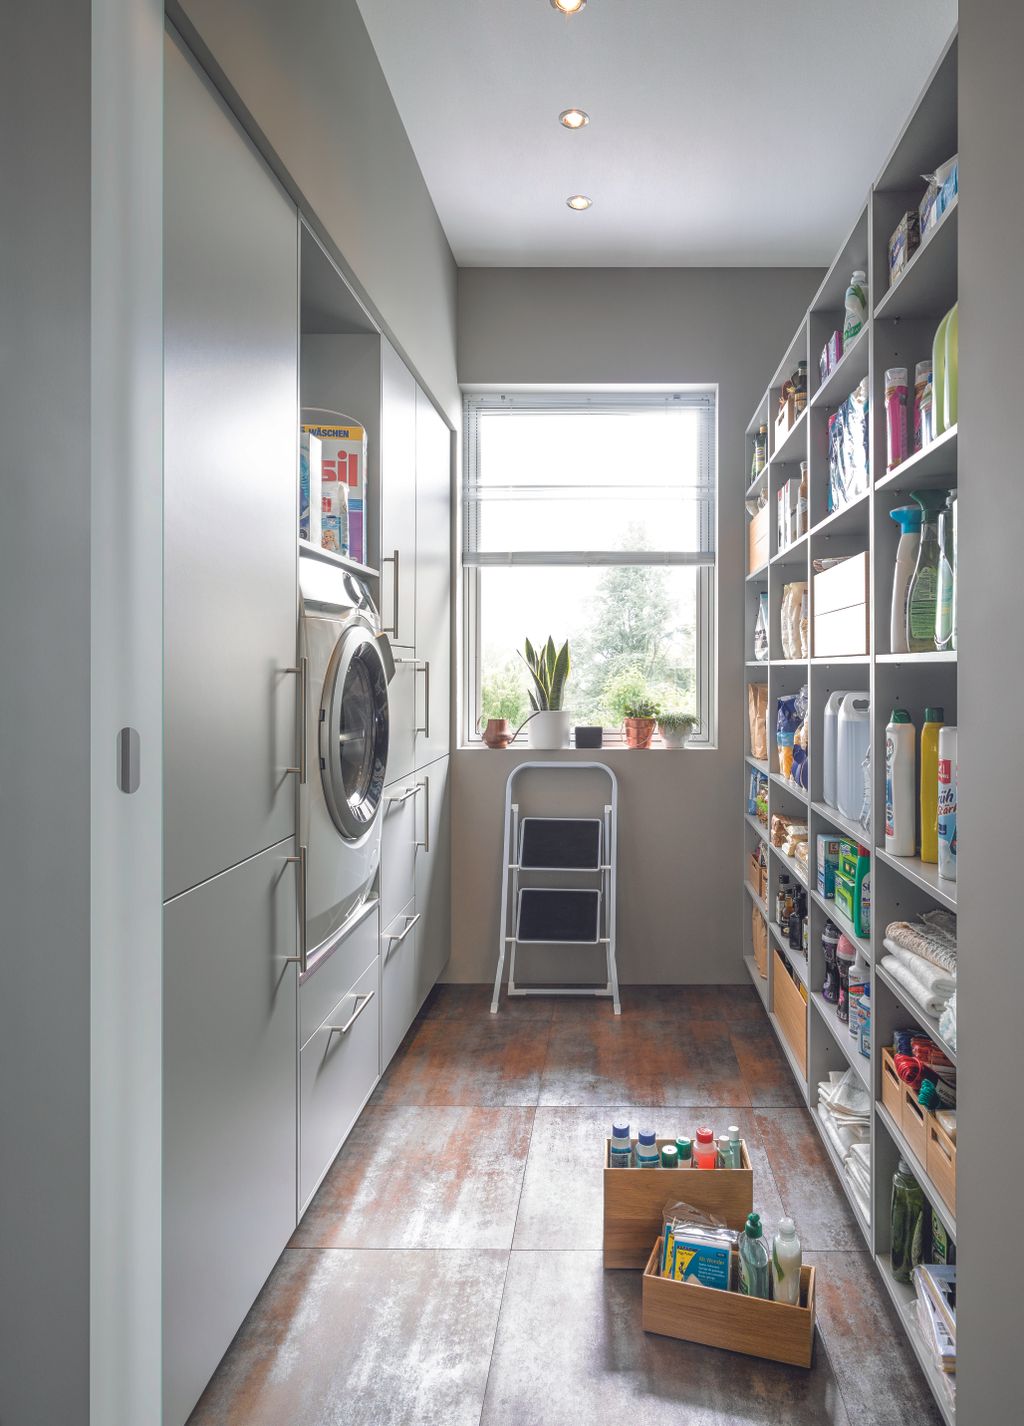 Utility room ideas: 22 inspiring ways to organise yours | Real Homes